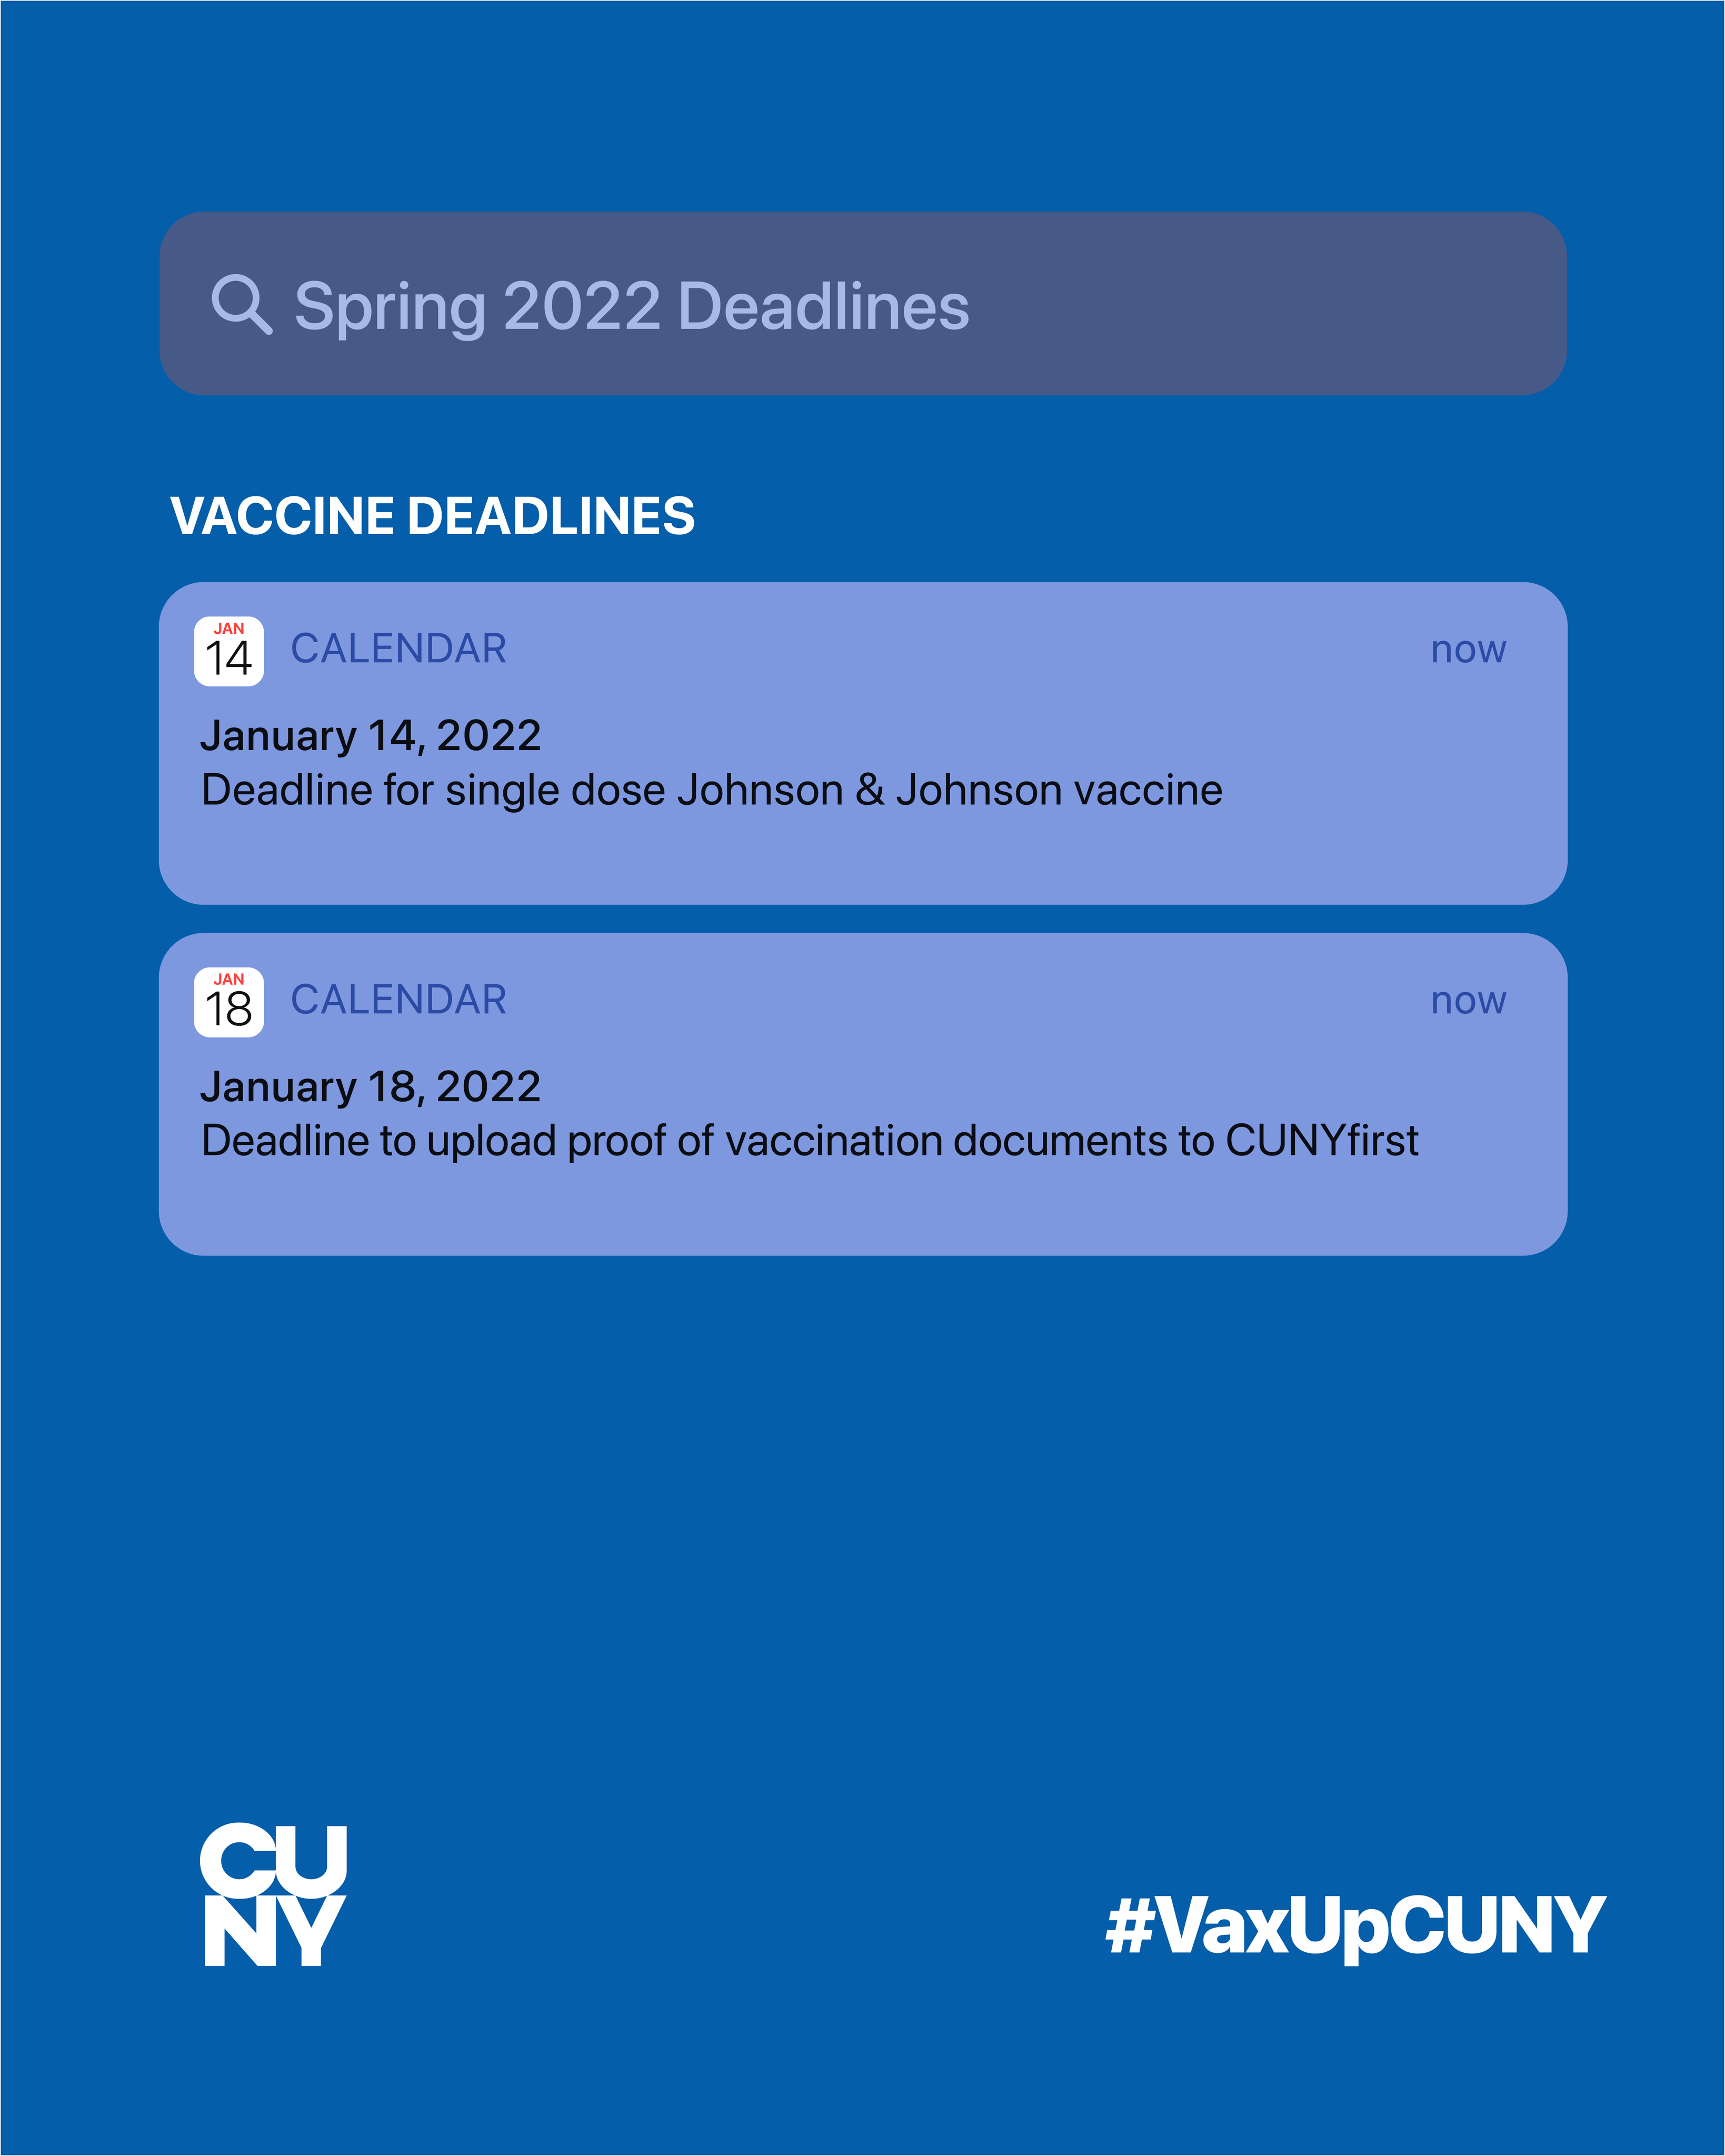 Cuny Calendar 2022 The City University Of New York On Twitter: "Students Enrolled In Hybrid  And In-Person Classes Are Required To Be Vaccinated. 🗓️1/14: Deadline To  Get The Johnson & Johnson Vaccine 🗓️1/18: Deadline To